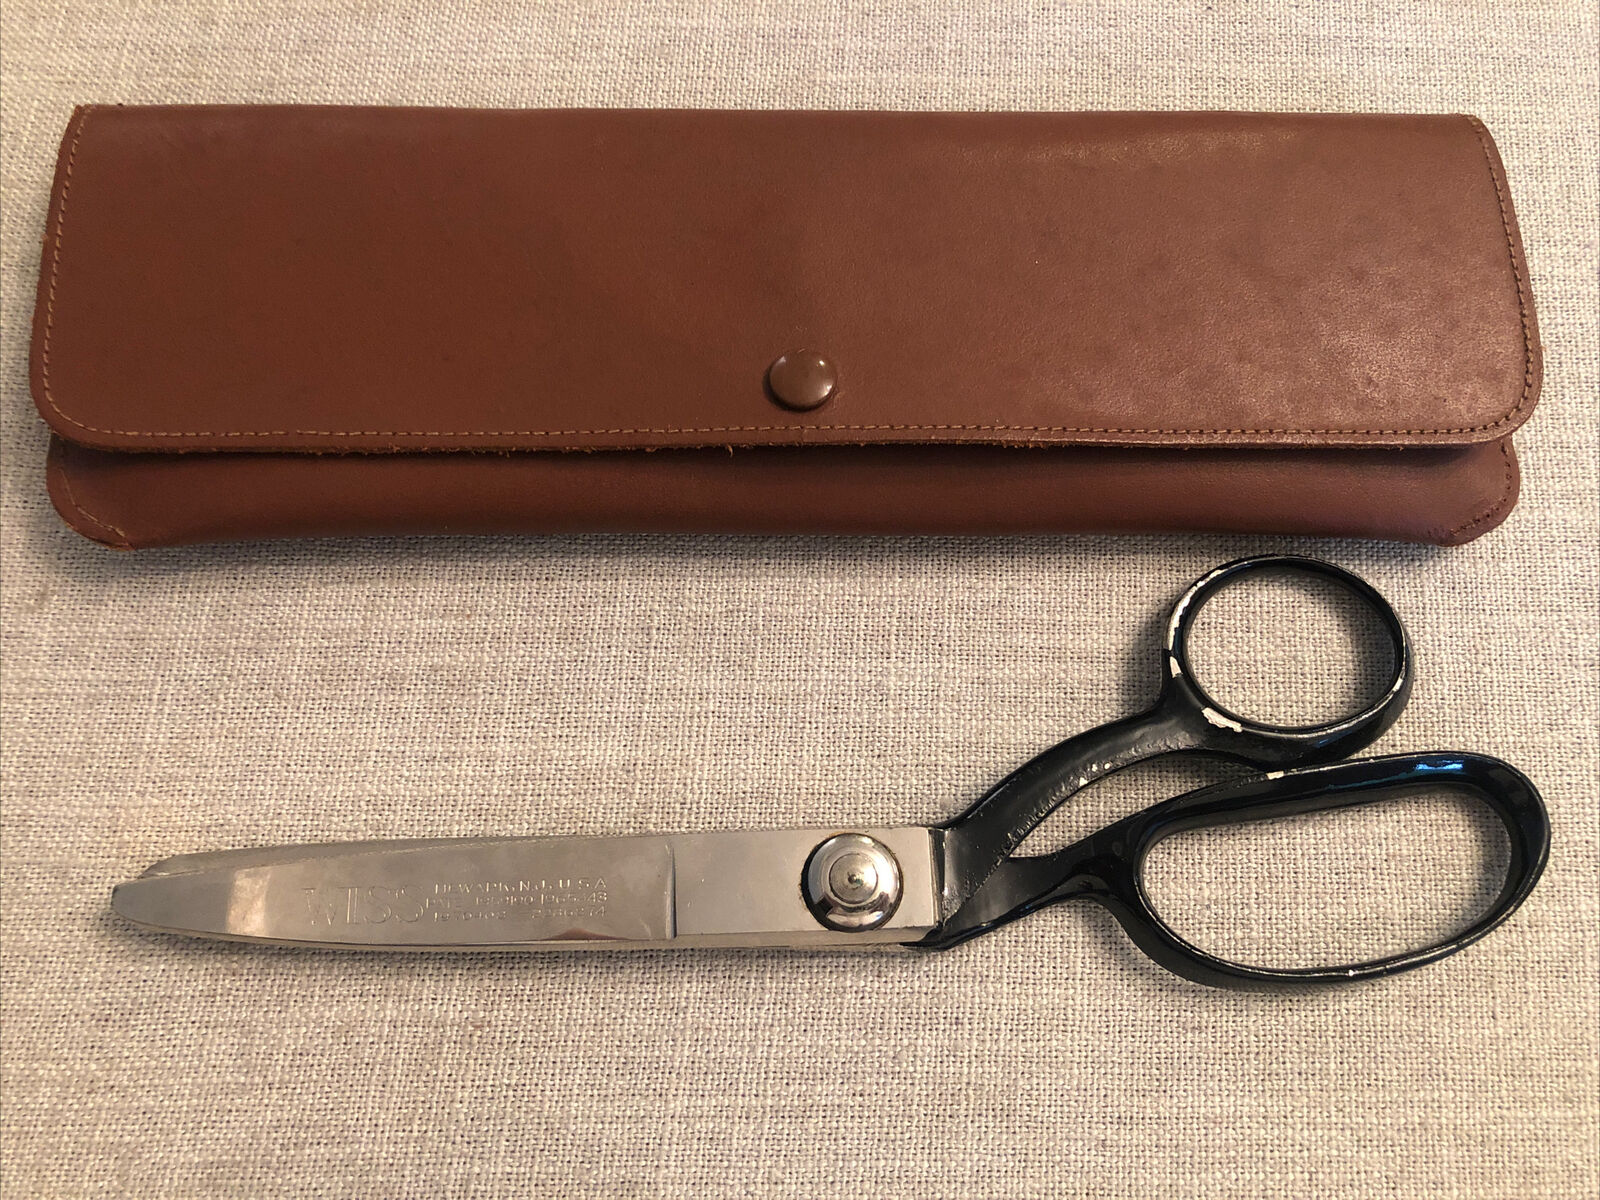 Wiss Vintage Model C Pinking Shears In Original Leather Case. USA